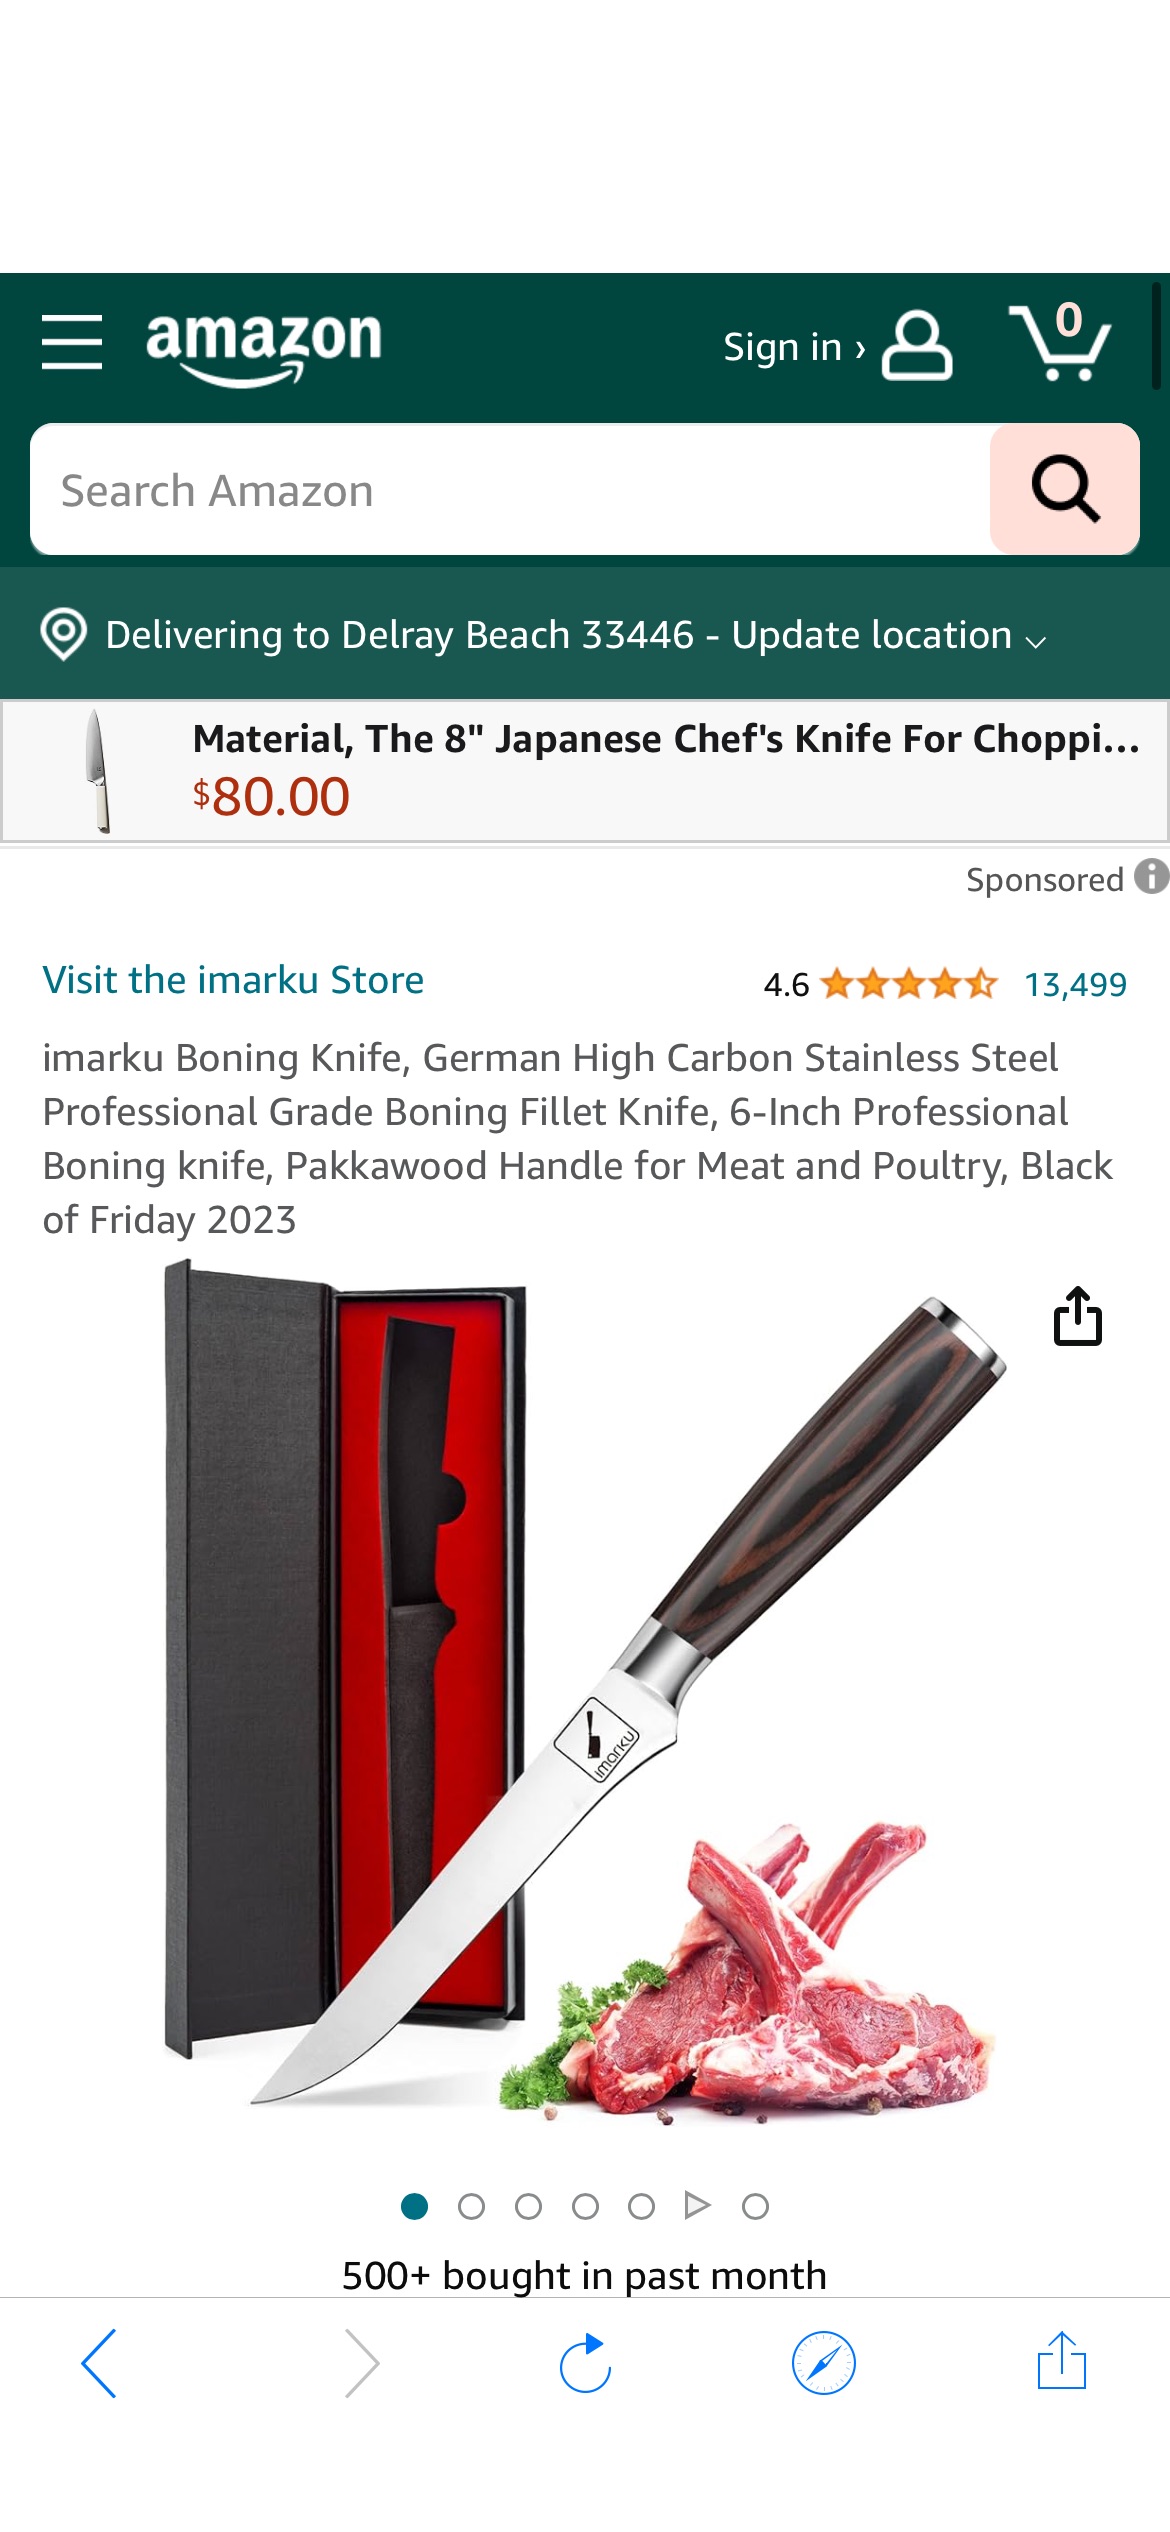 Amazon.com: imarku Japanese Chef Knife - Pro Kitchen Knife 8 Inch Chef's Knives High Carbon Stainless Steel Sharp Paring Knife with Ergonomic Handle, Useful Kitchen Gadgets 2023 Gifts for Women and Me